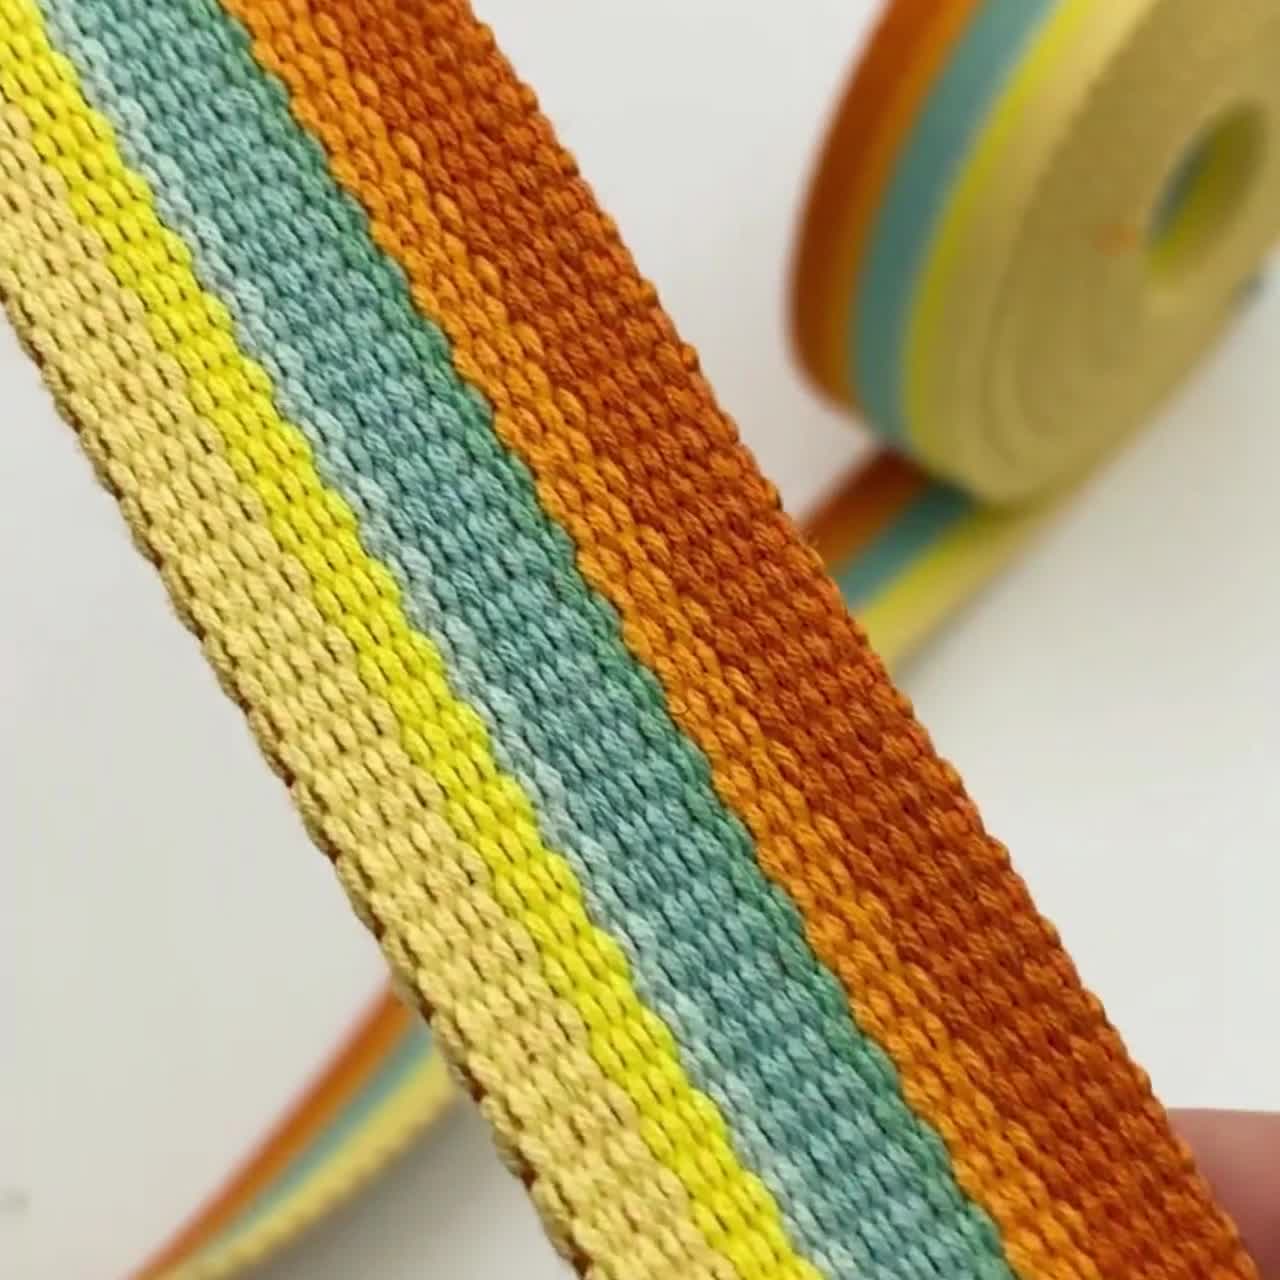 1 Inch Wide Cotton Webbing 25mm Colored Webbing by the Yard 